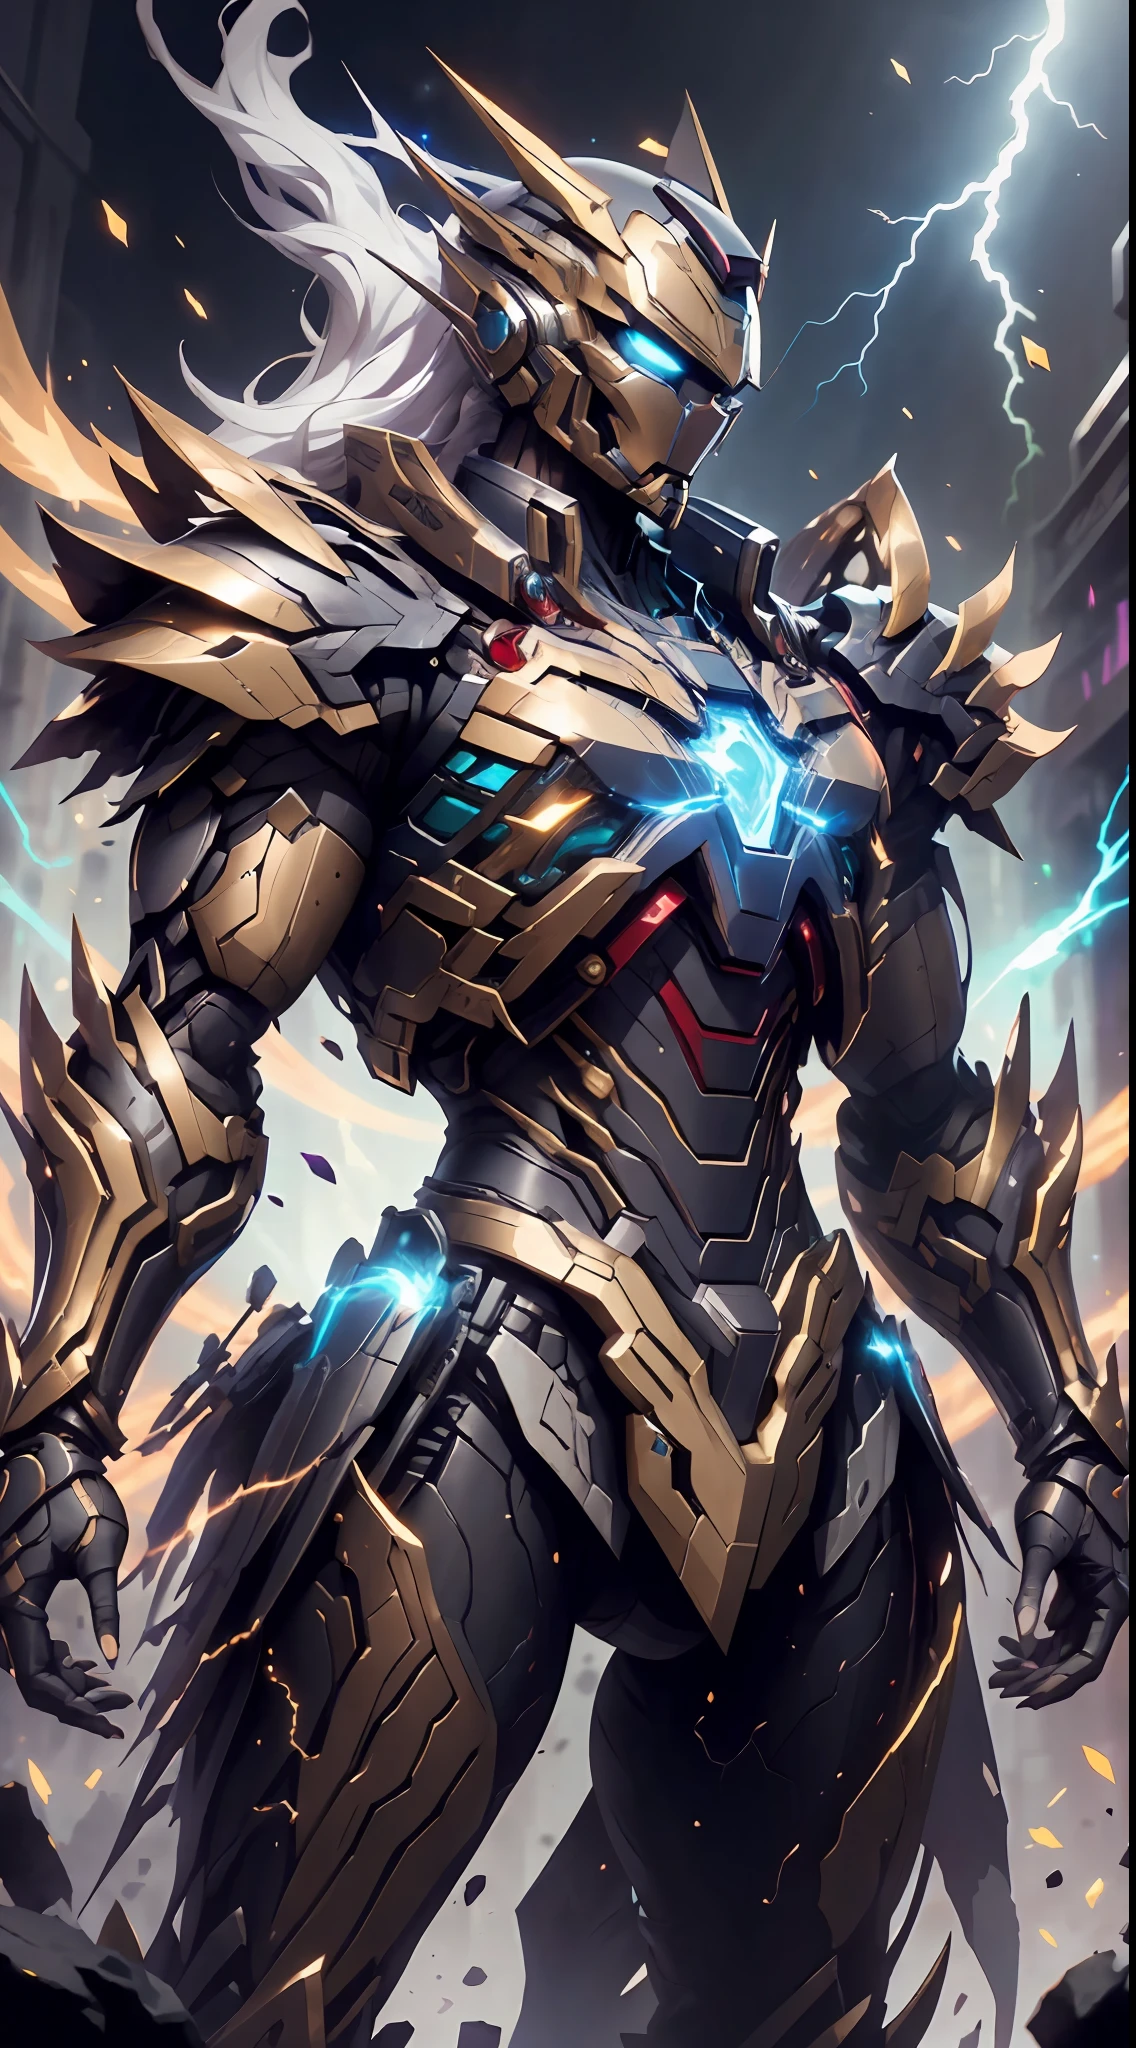 Golden Saint Seiya Limb Armor, Marvel Movie Iron Man Cuirass, (Gundam 00 Gundam Exia: 1.5), (Mecha) (Mechanical) (Armor), (Open Leg: 1.3), Perfect, (Wide Angle), (Black Background: 1.6), Best Quality, Masterpiece, Cyberpunk Style, Human Face Helmet, Super Resolution, (Reality: 1.4), 1boy, broad shoulders, grim eyes, crazy details, (hip folds: 1.2), unrealistic engine style, Boca effect, David La Chapelle style lenses, bioluminescent palette: light blue, light gold, bright white, light black, wide angle, super fine, cinematic still life, vibrant, Sakimichan style, perfect eyes, highest image quality 8K, inspired by Harry Winston, a masterpiece shot by Canon EOS R 6" Chaos 50,--, Mole Under Eyes, ray tracing, surrealism, textured skin, metallic sheen, facing the audience, lightning and lightning night, laser weapon in hand